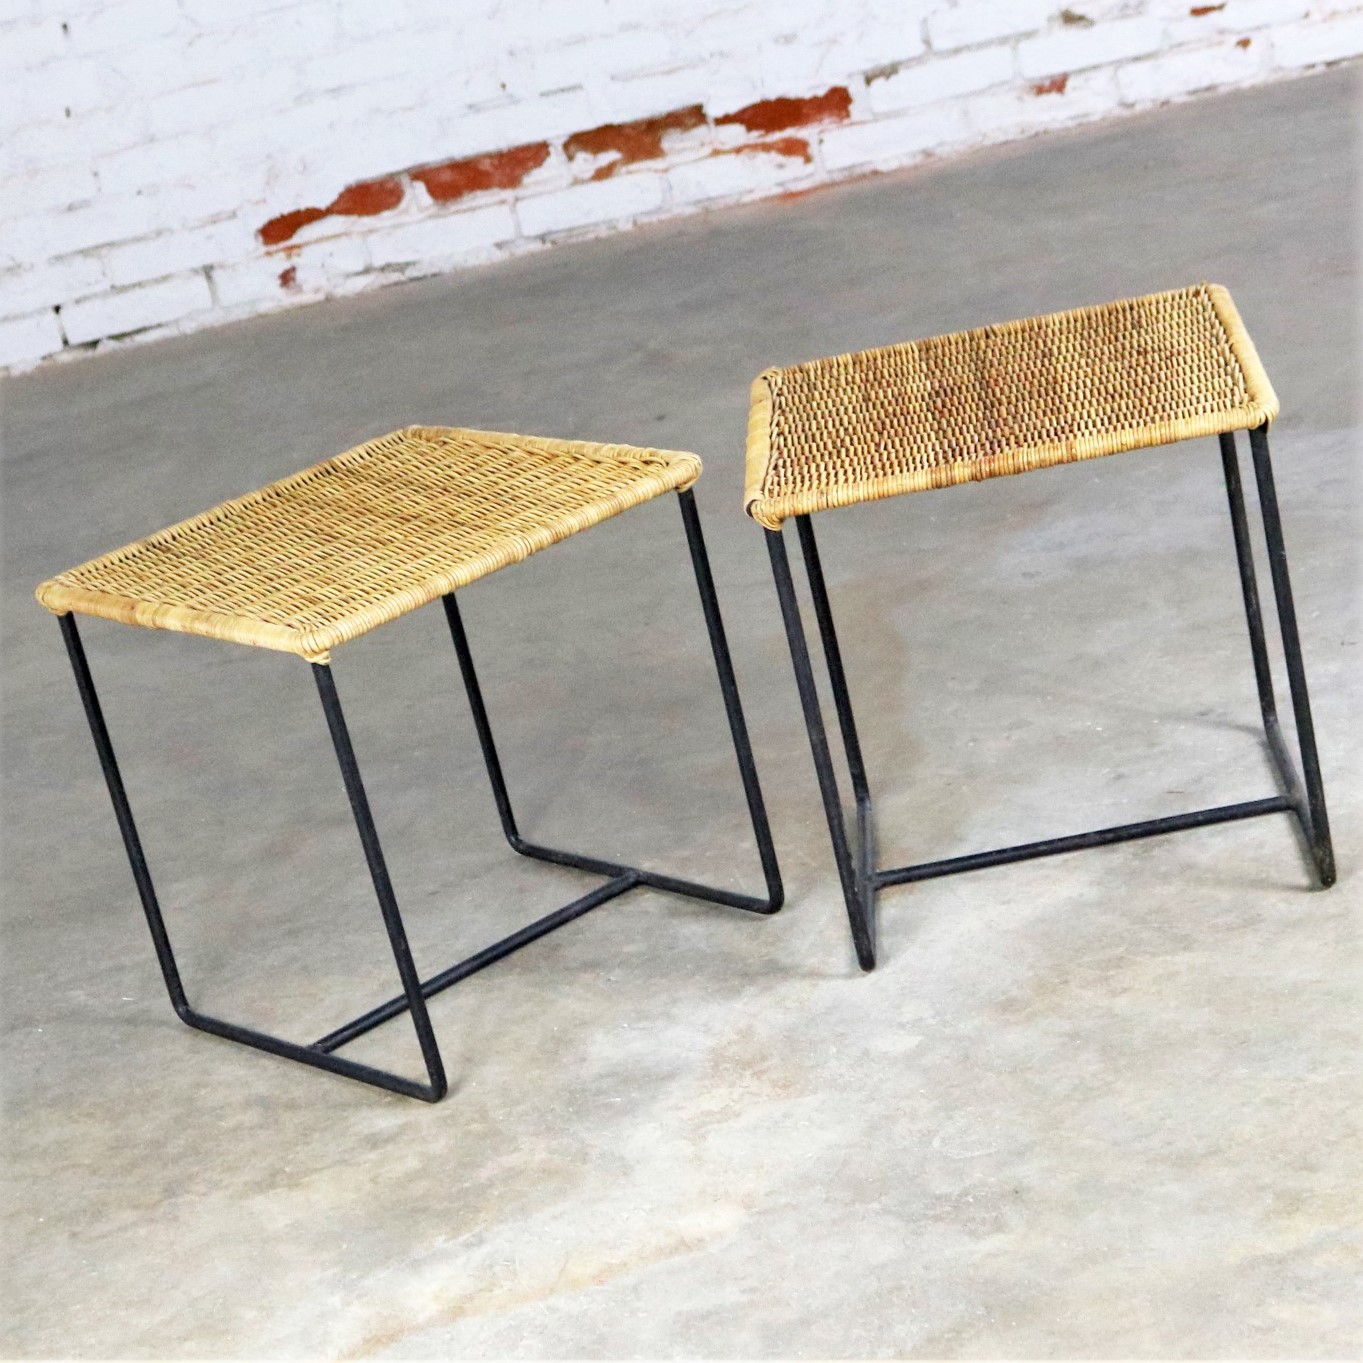 Calif-Asia Style Wrought Iron and Rattan Side Tables Mid Century Modern, a Pair